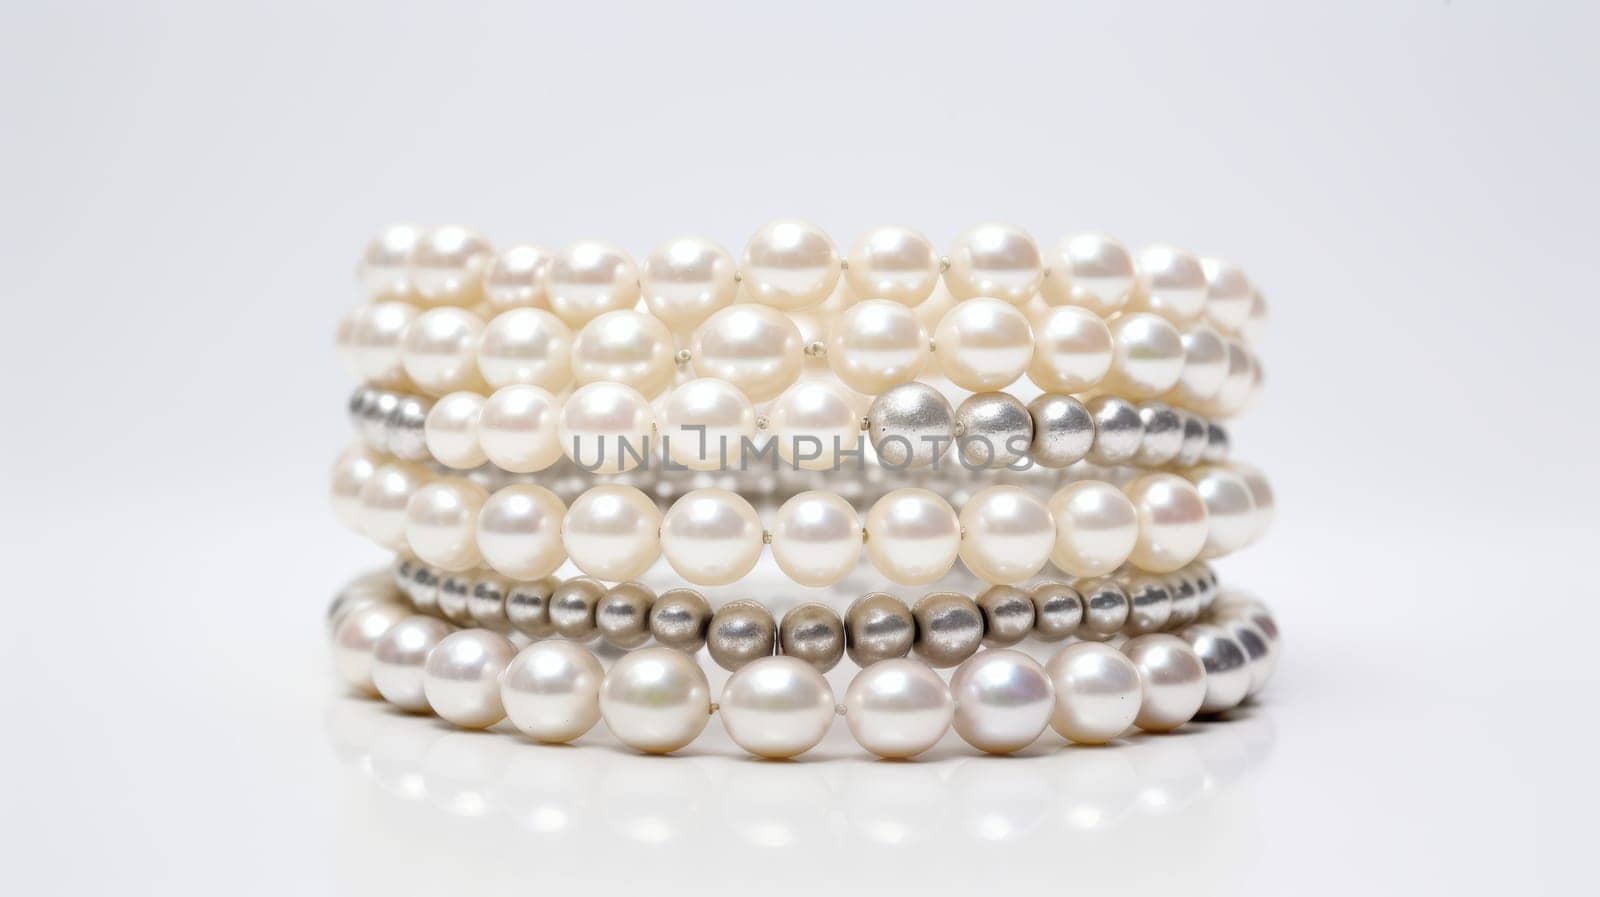 Stack of pearl bracelets on white background. Round pearls in white, cream and silver shades. Layered and tilted bracelets. Perfect for themes of elegance, luxury and beauty. by DogDrawHand